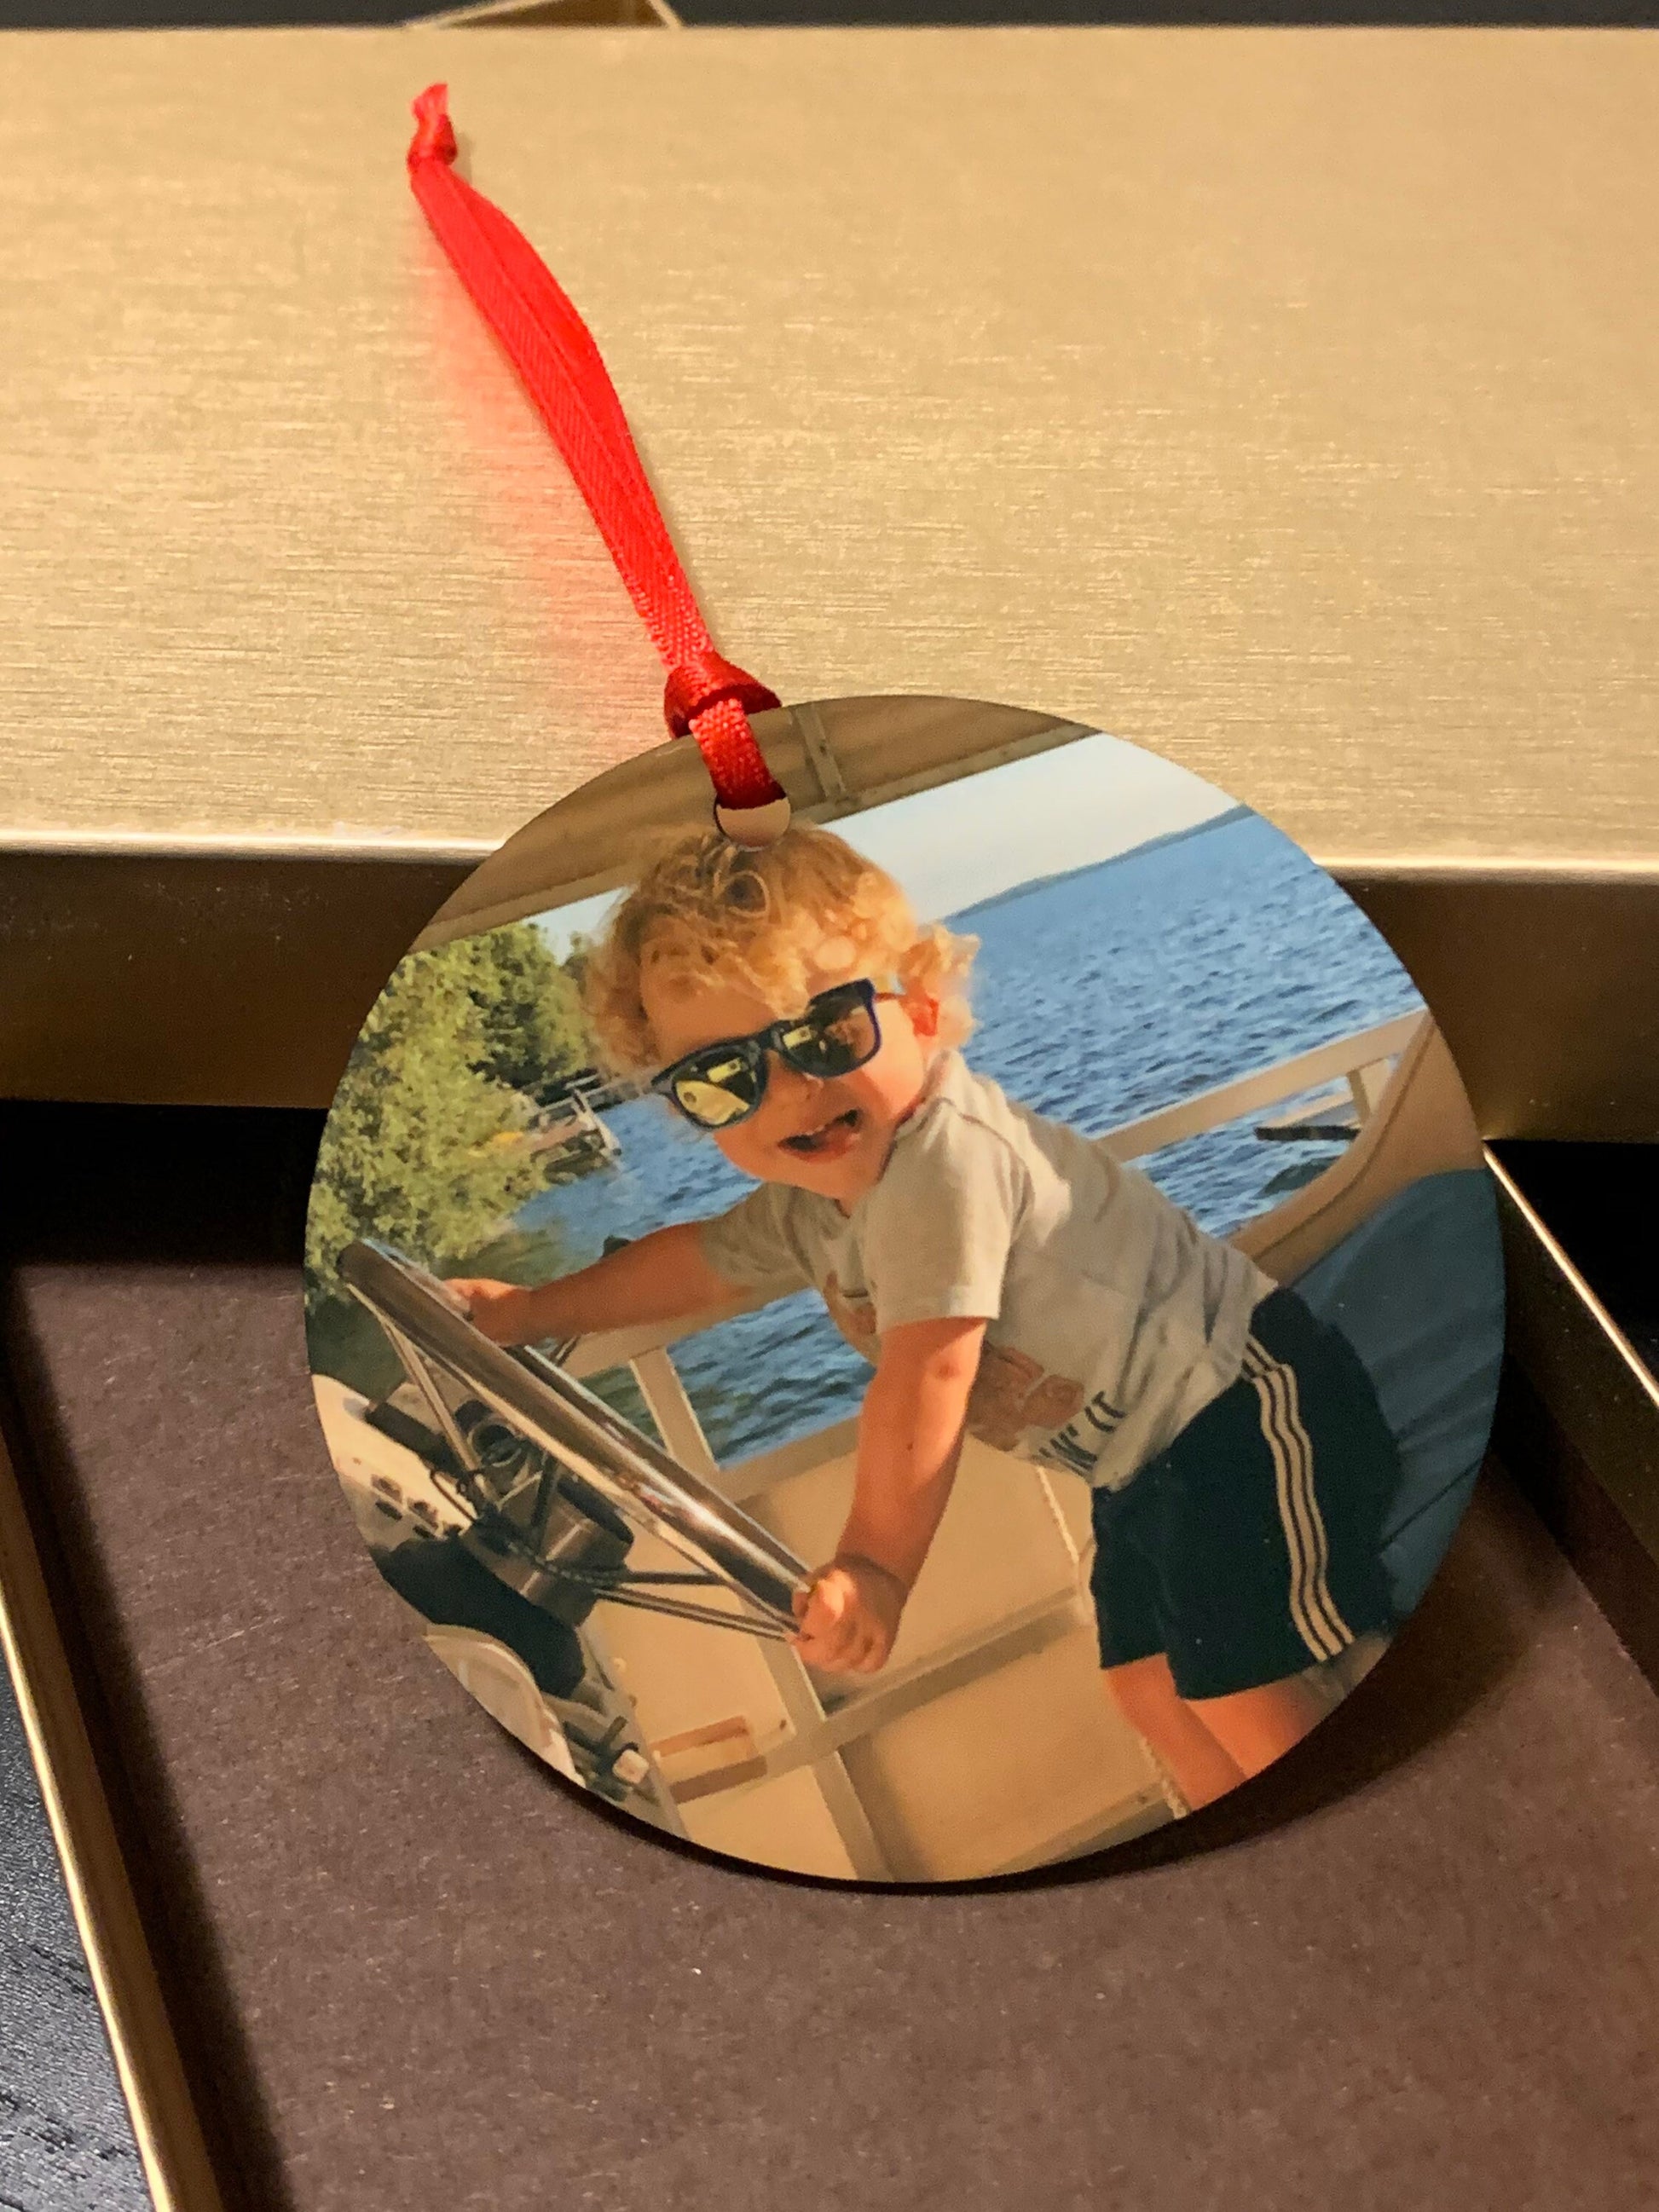 Custom Ornament for Christmas Stocking Stuffer, Personalized Round Christmas Decoration, Christmas Tree Ornaments